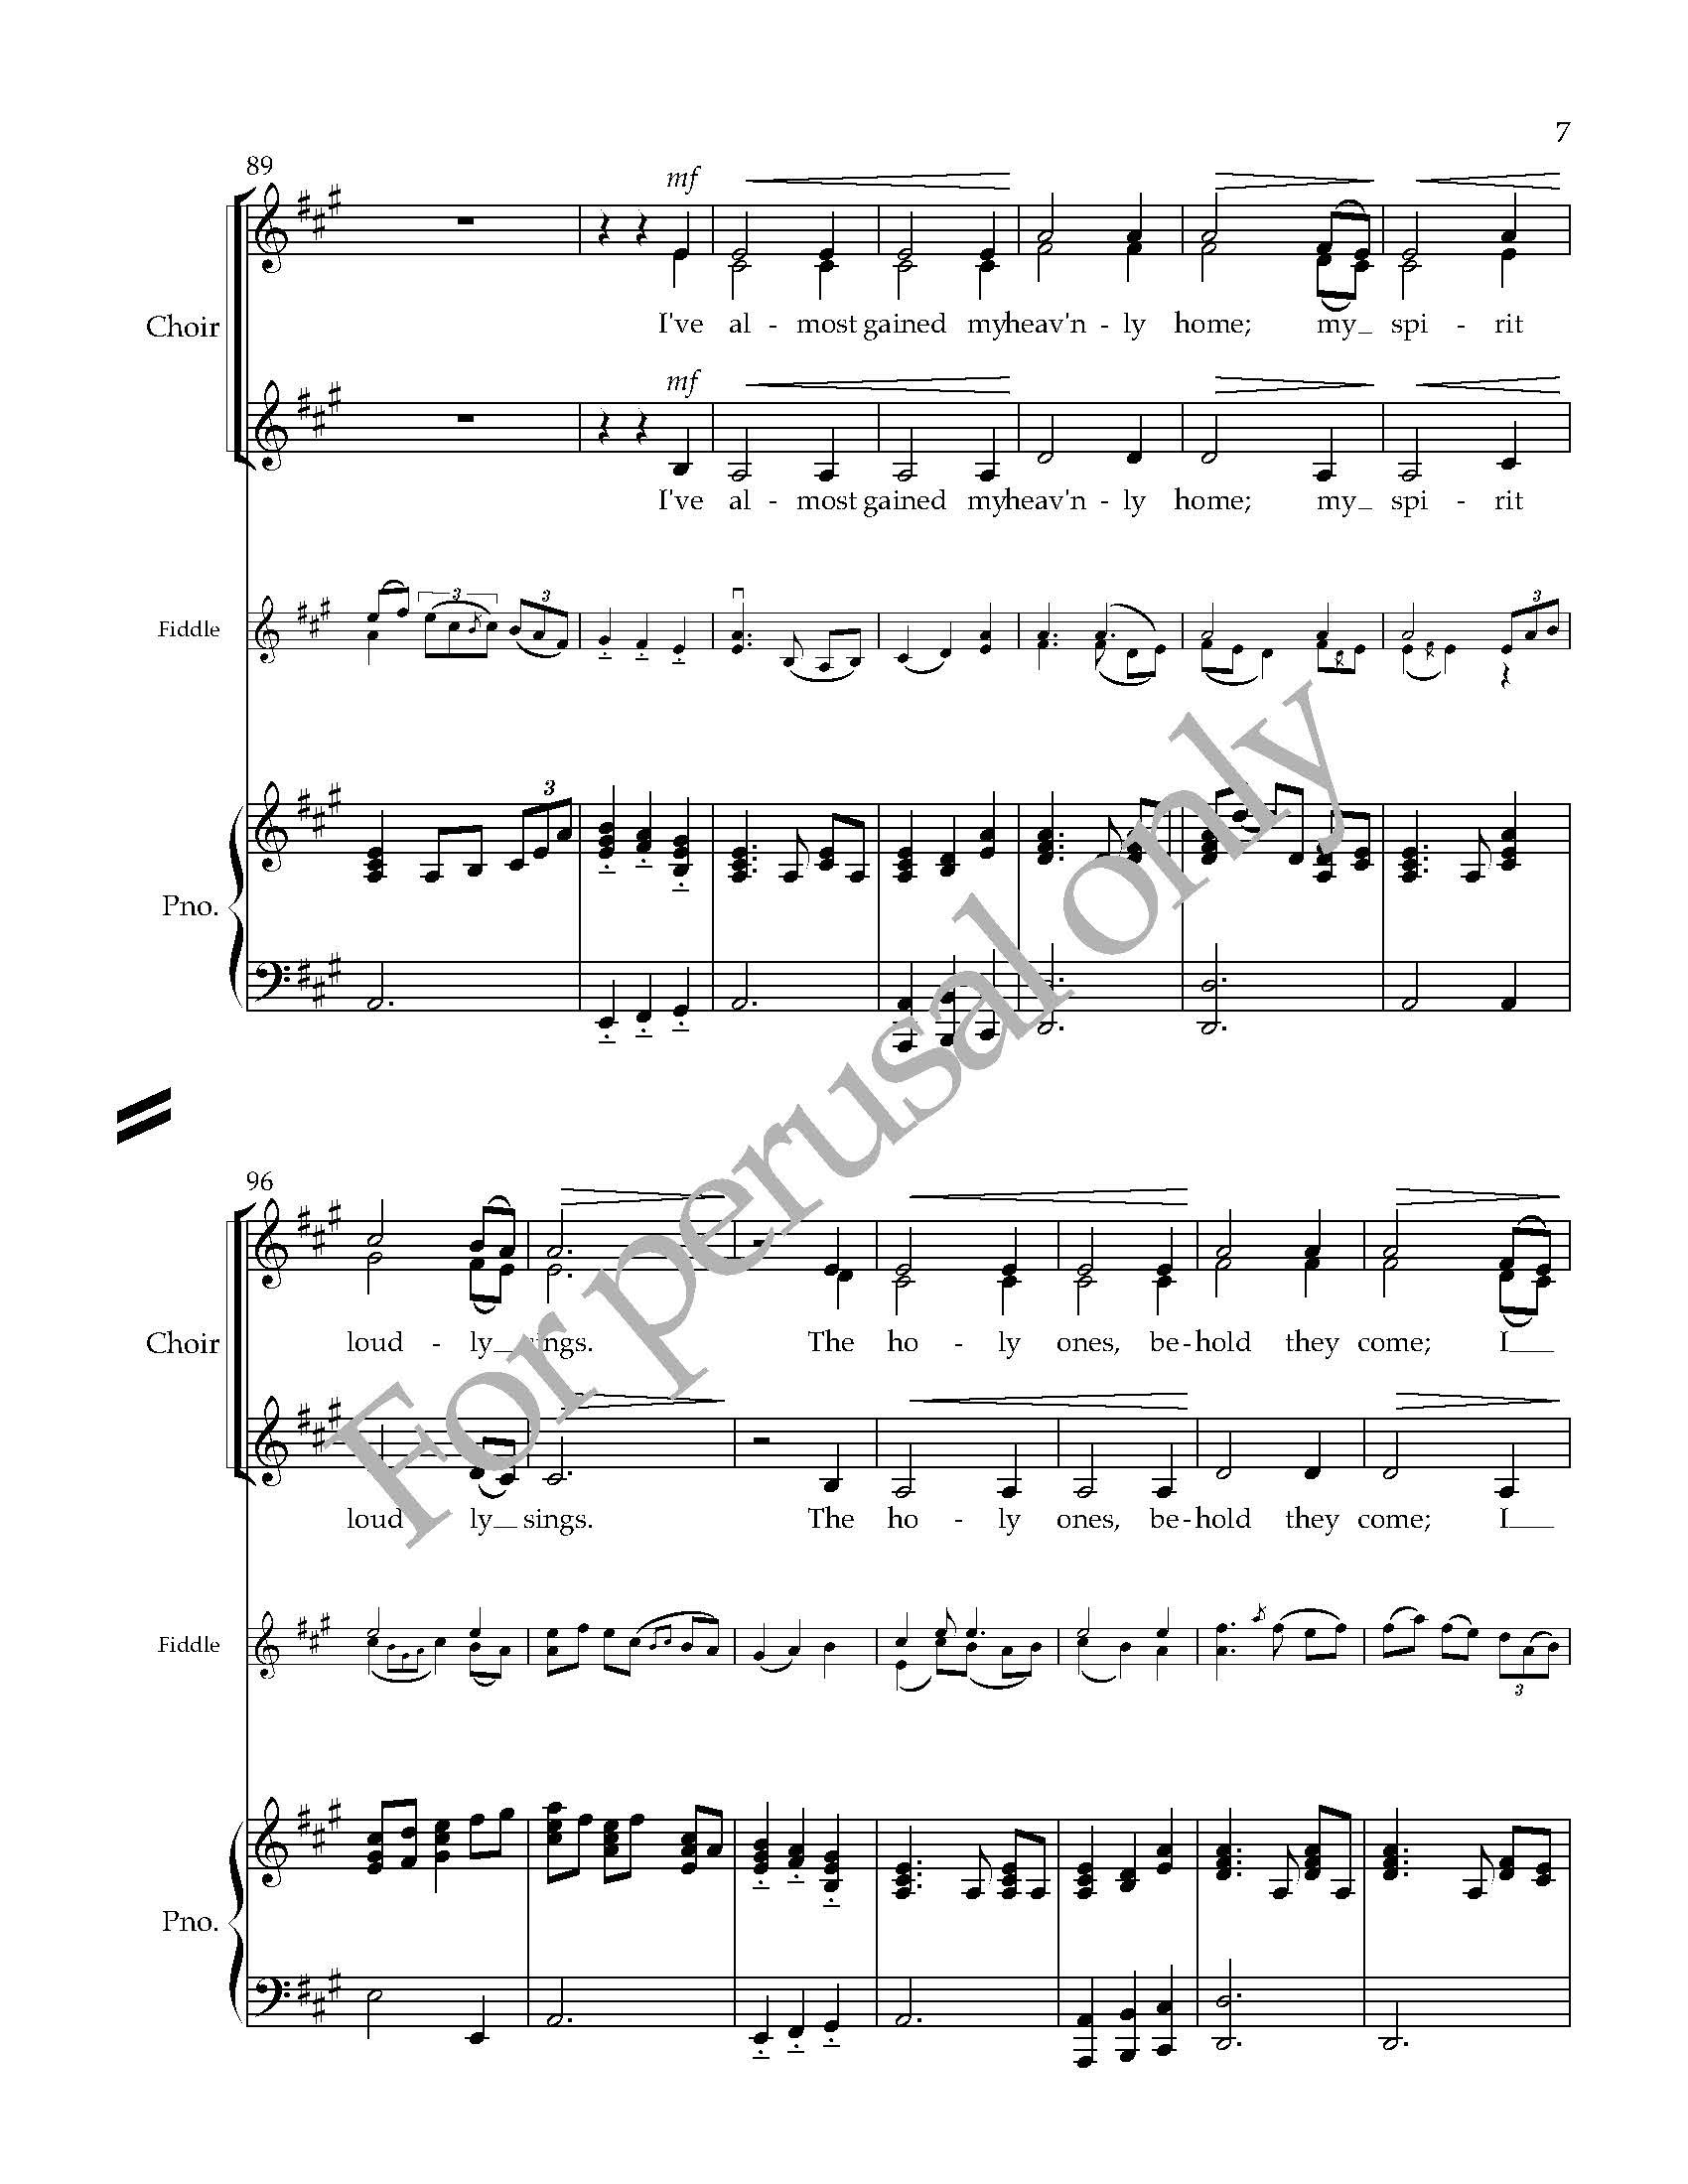 VOCAL SCORE  preview- Angel Band for three-part choir, piano, fiddle, guitar, string bass - arr. Ryan James Brandau_Page_09.jpg